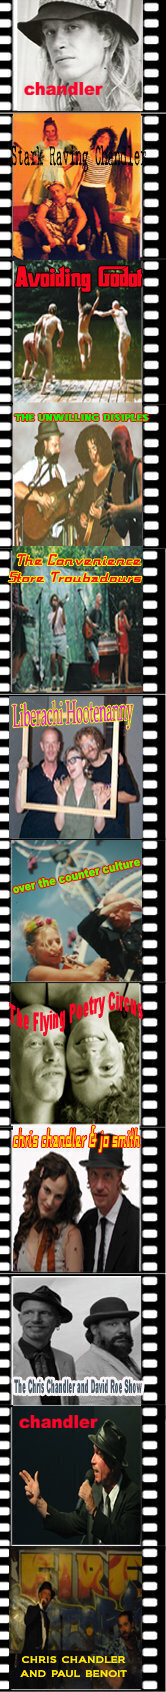 film strip of the history of chris music career